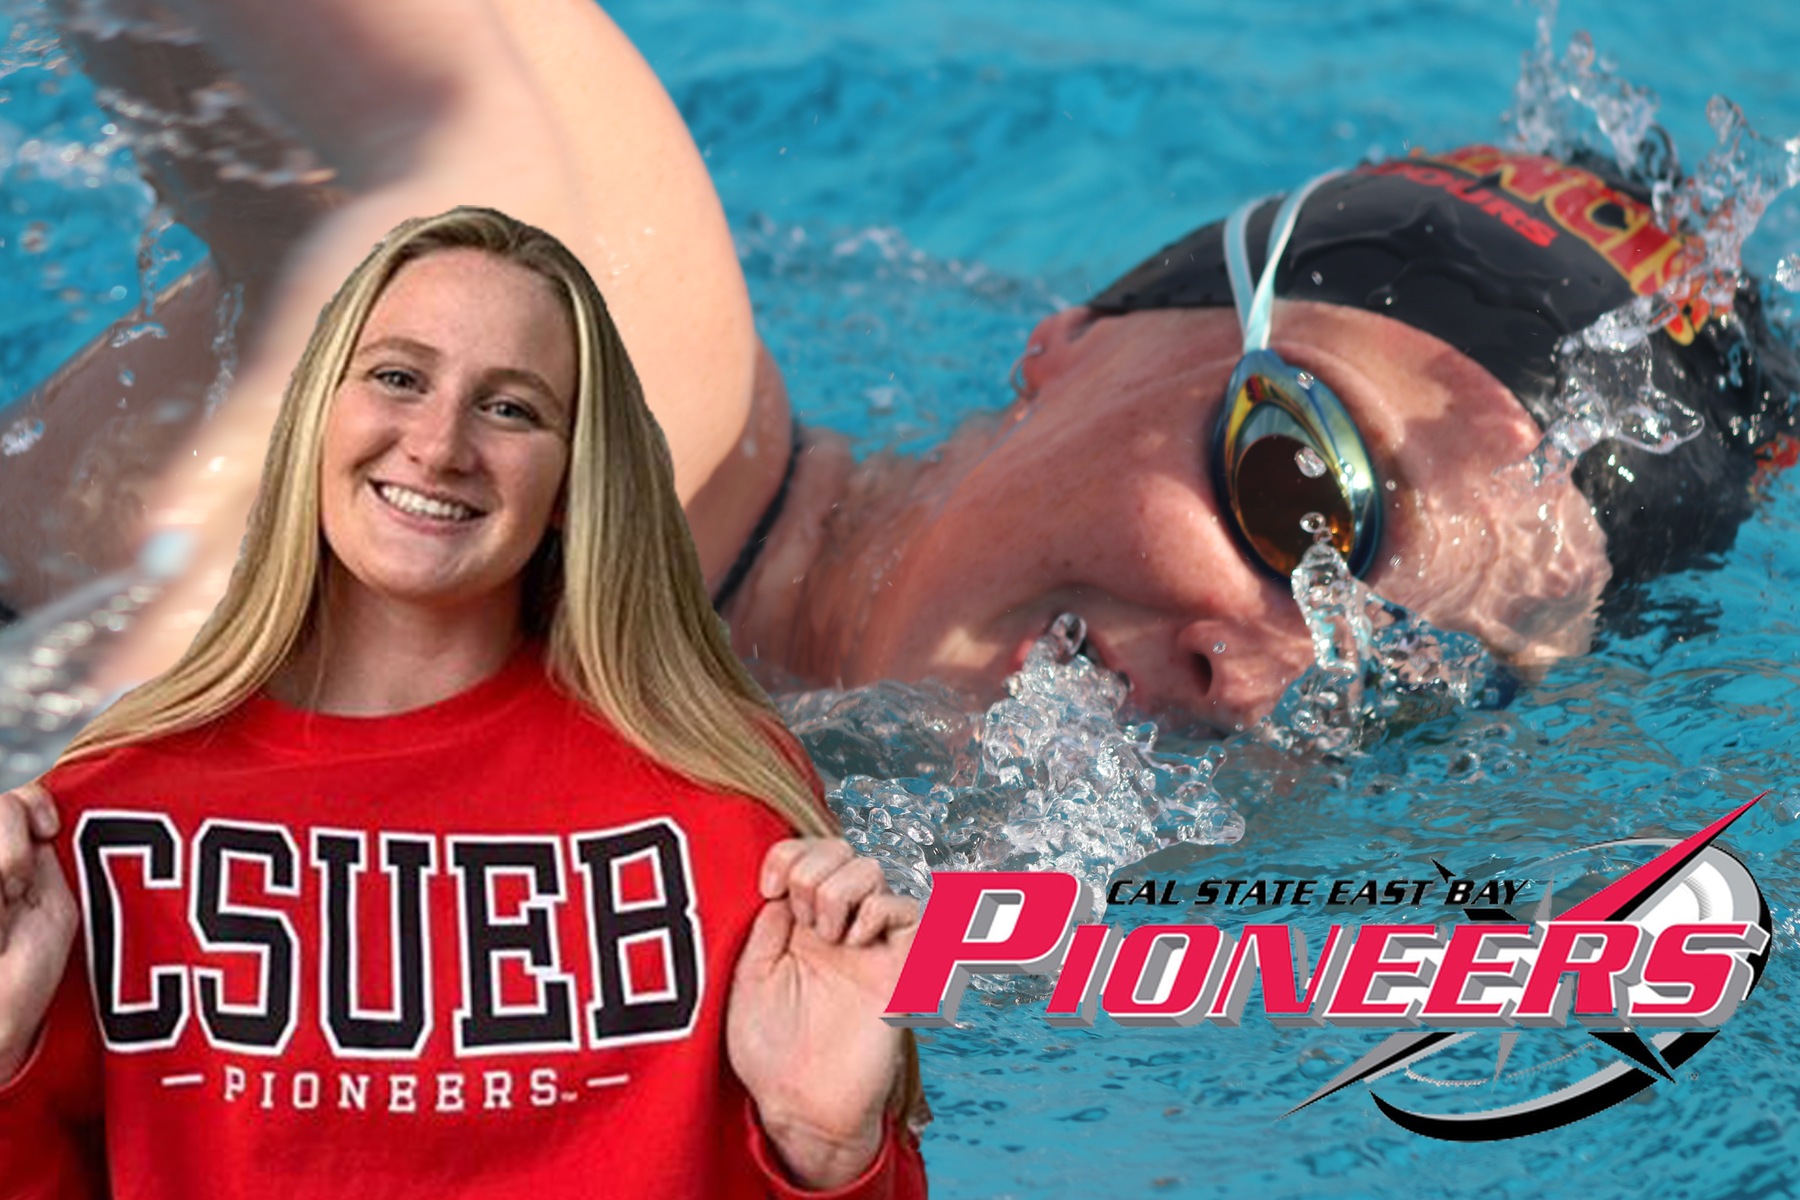 Senior Chloe Beebout to Swim at Cal State East Bay